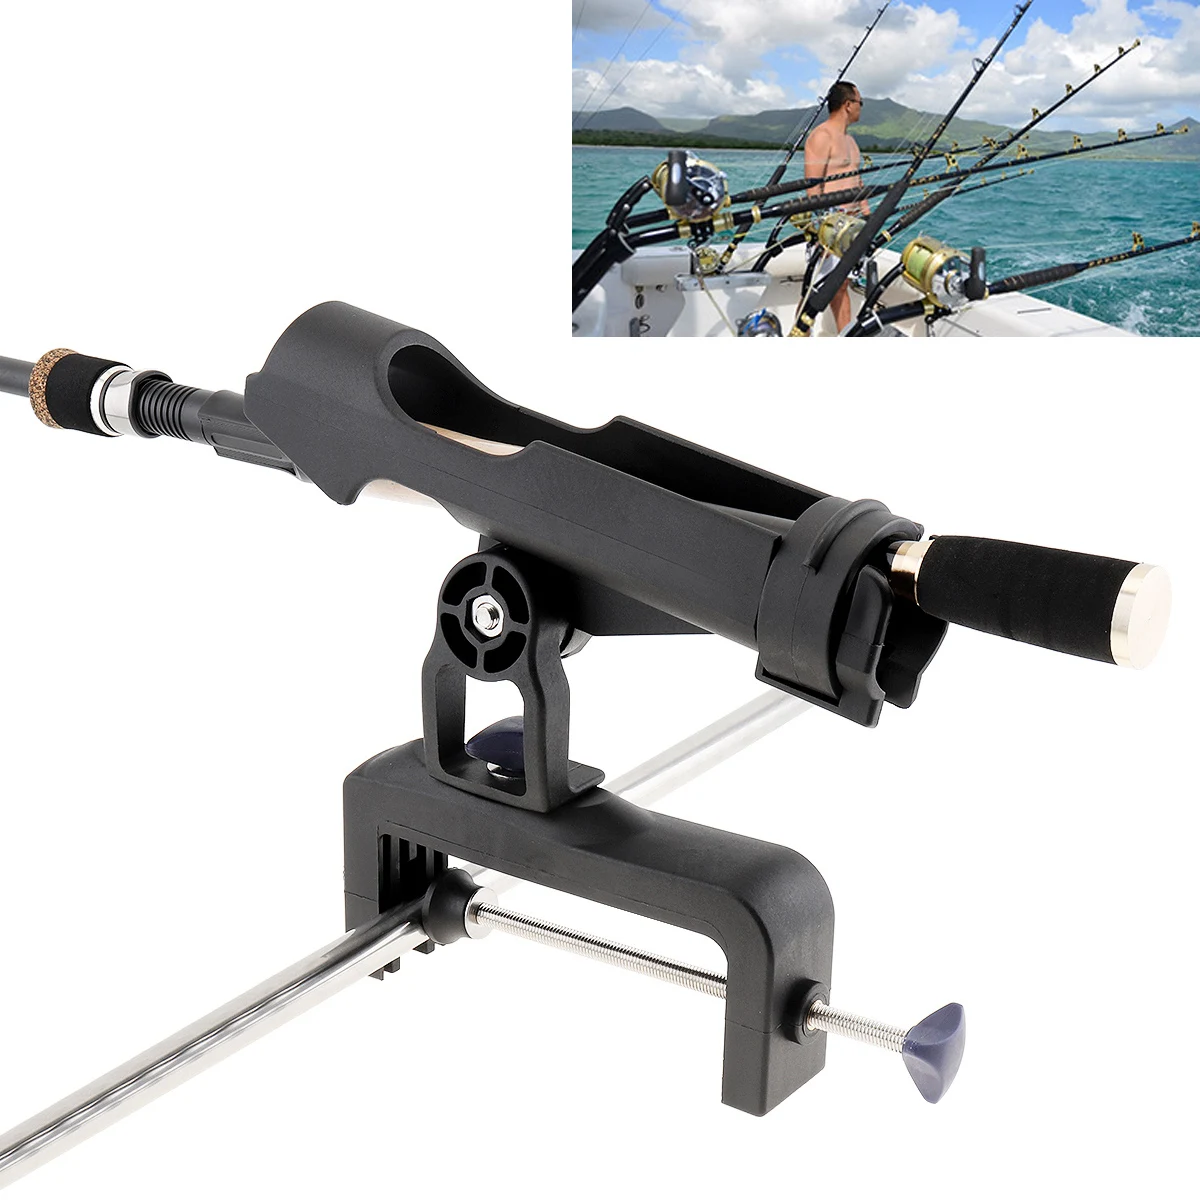 

Fishing Support Rod Stand Bracket Yacht Fishing Tackle Tool 360 Degrees Rotatable Rod Holder for Handrail /Boat/Canoe and Kayak